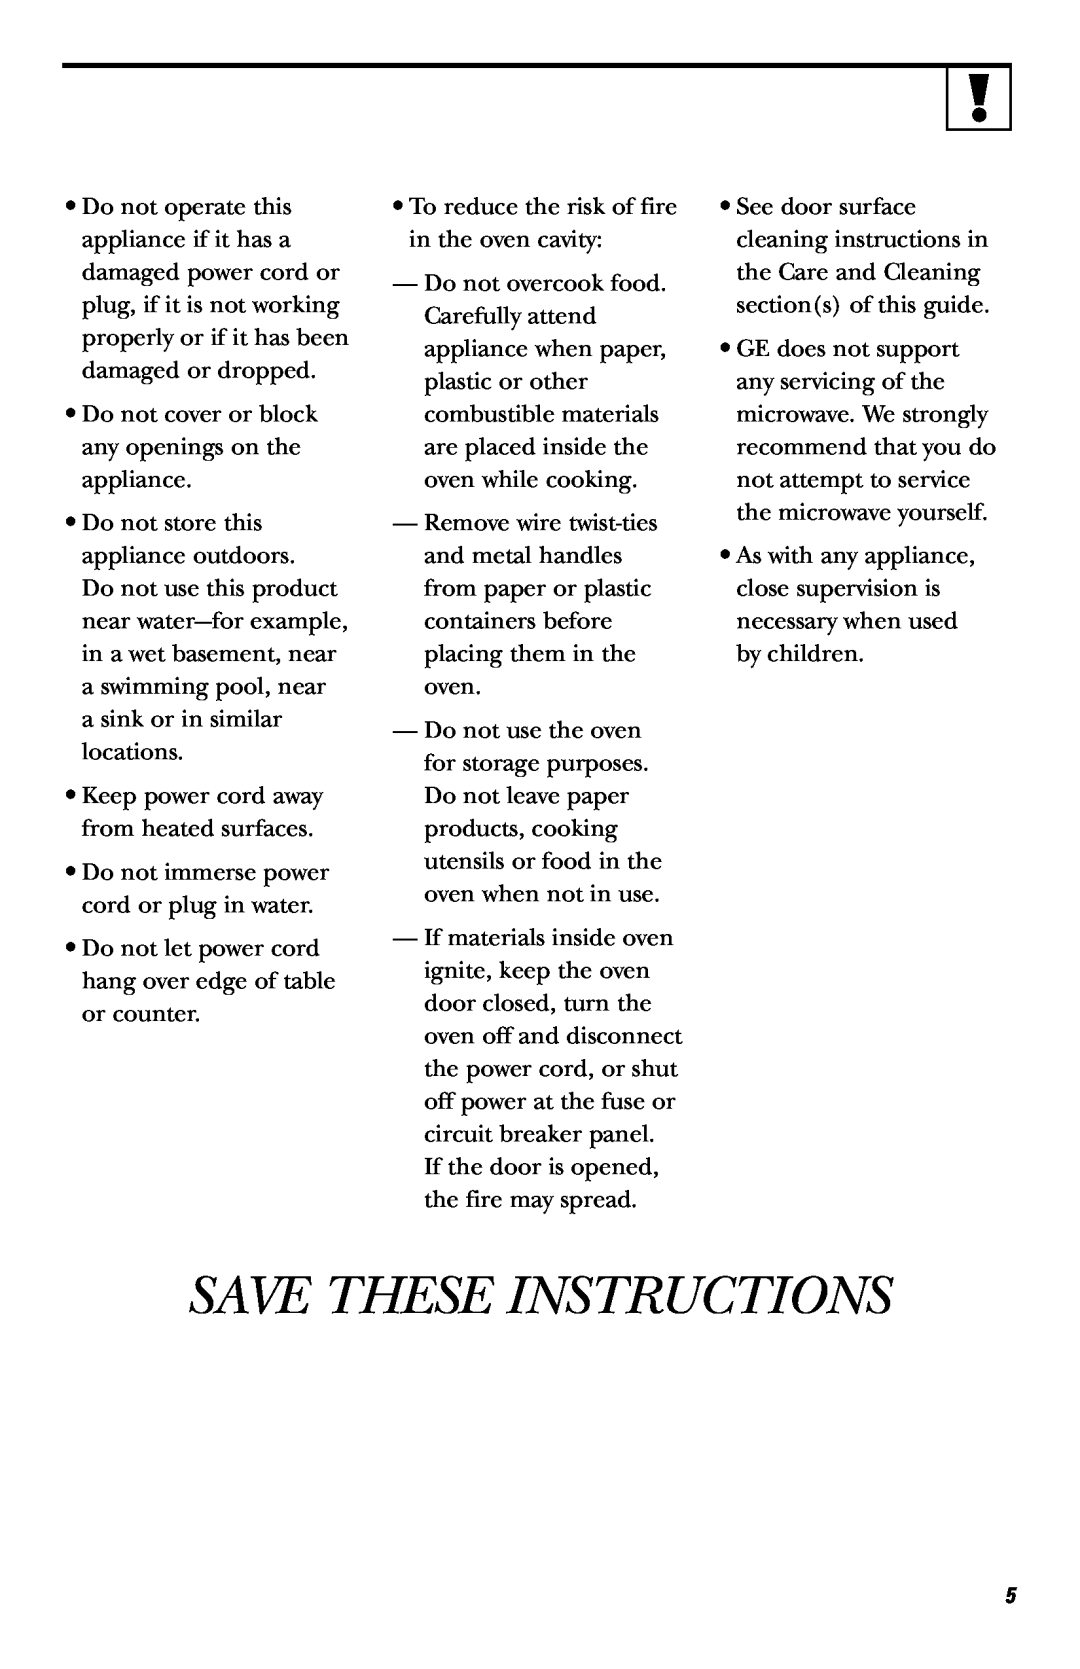 Frigidaire JE740 owner manual Save These Instructions 